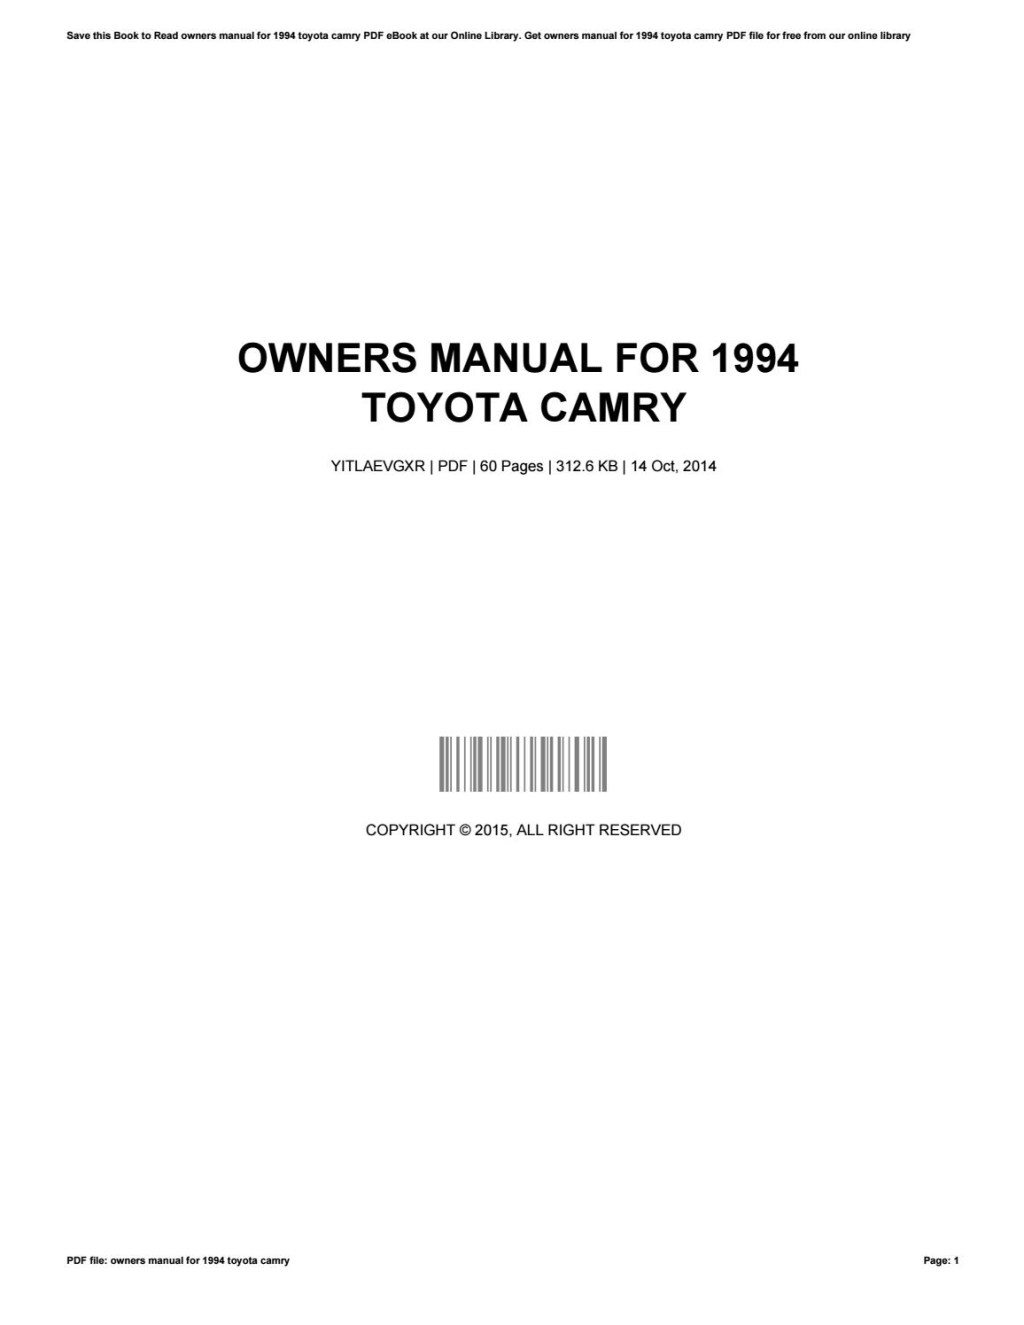 Picture of: Owners manual for  toyota camry by RobertSons – Issuu